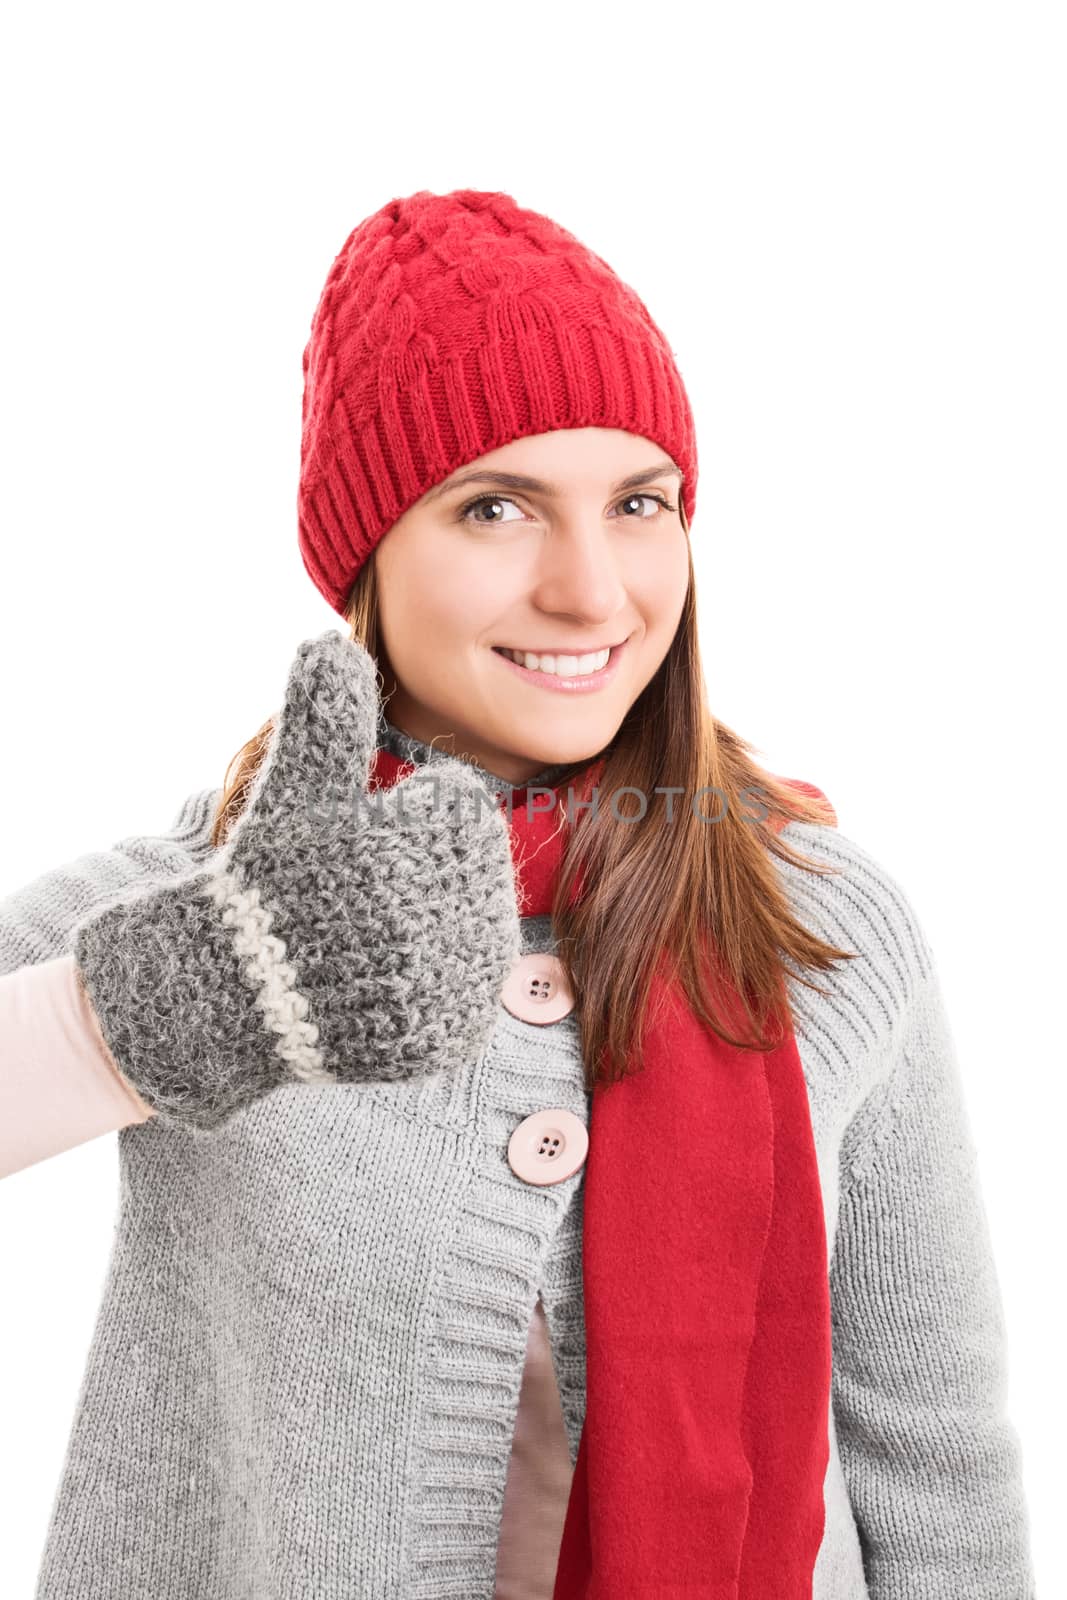 Beautiful smiling young girl in winter clothes holding thumbs up, isolated on white background.